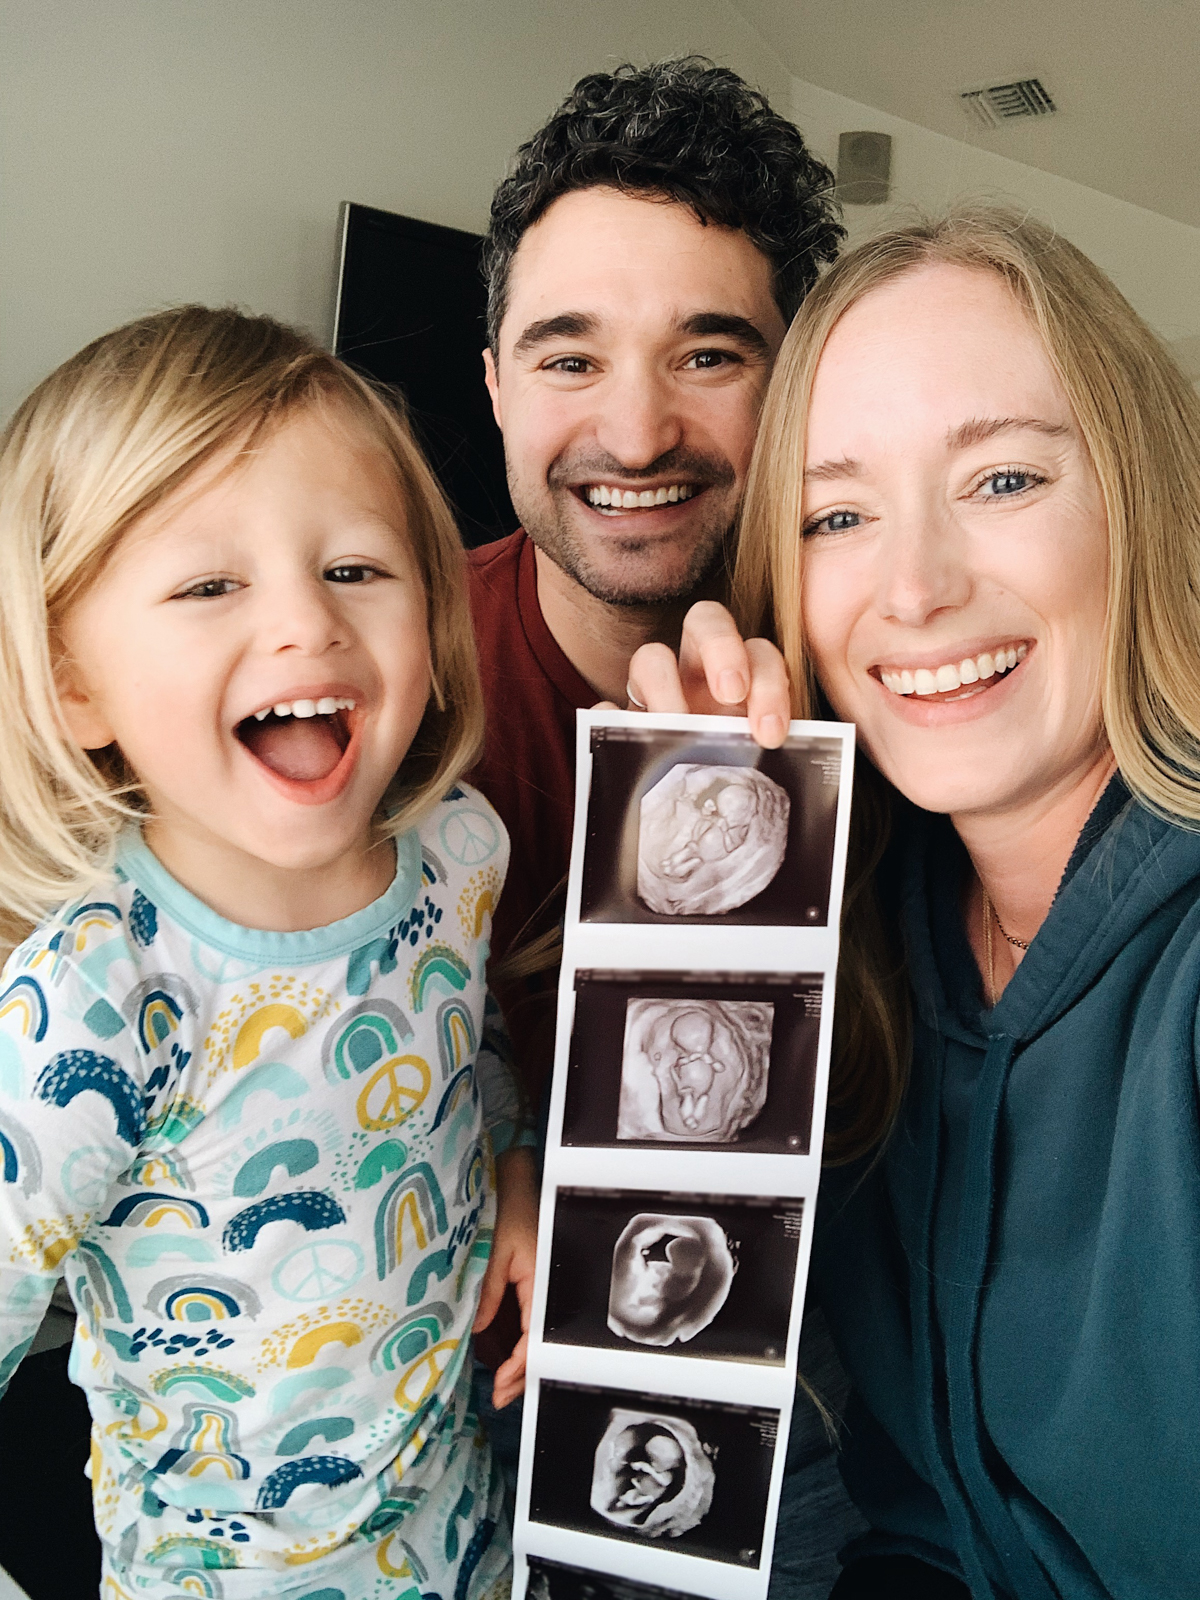 Kimberly Lapides of EATSLEEPWEAR IVF FET Pregnancy Announcement with ultrasound and family